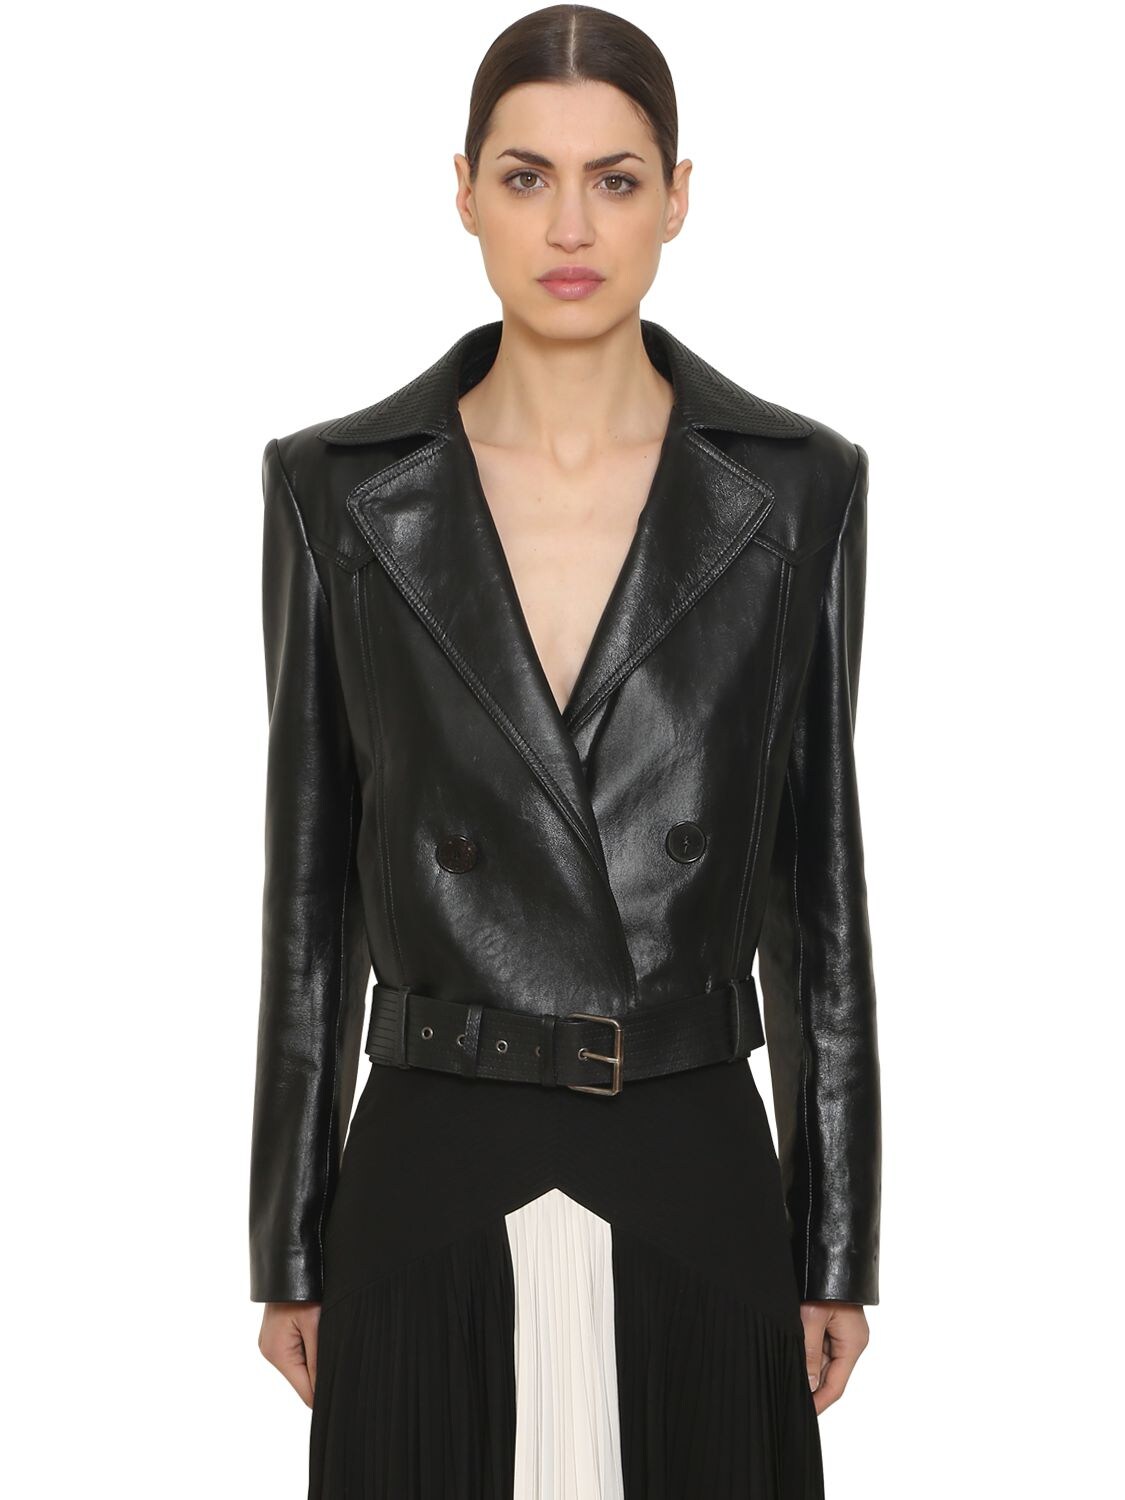 GIVENCHY DOUBLE BREASTED LEATHER BIKER JACKET,68ID19018-MDAx0